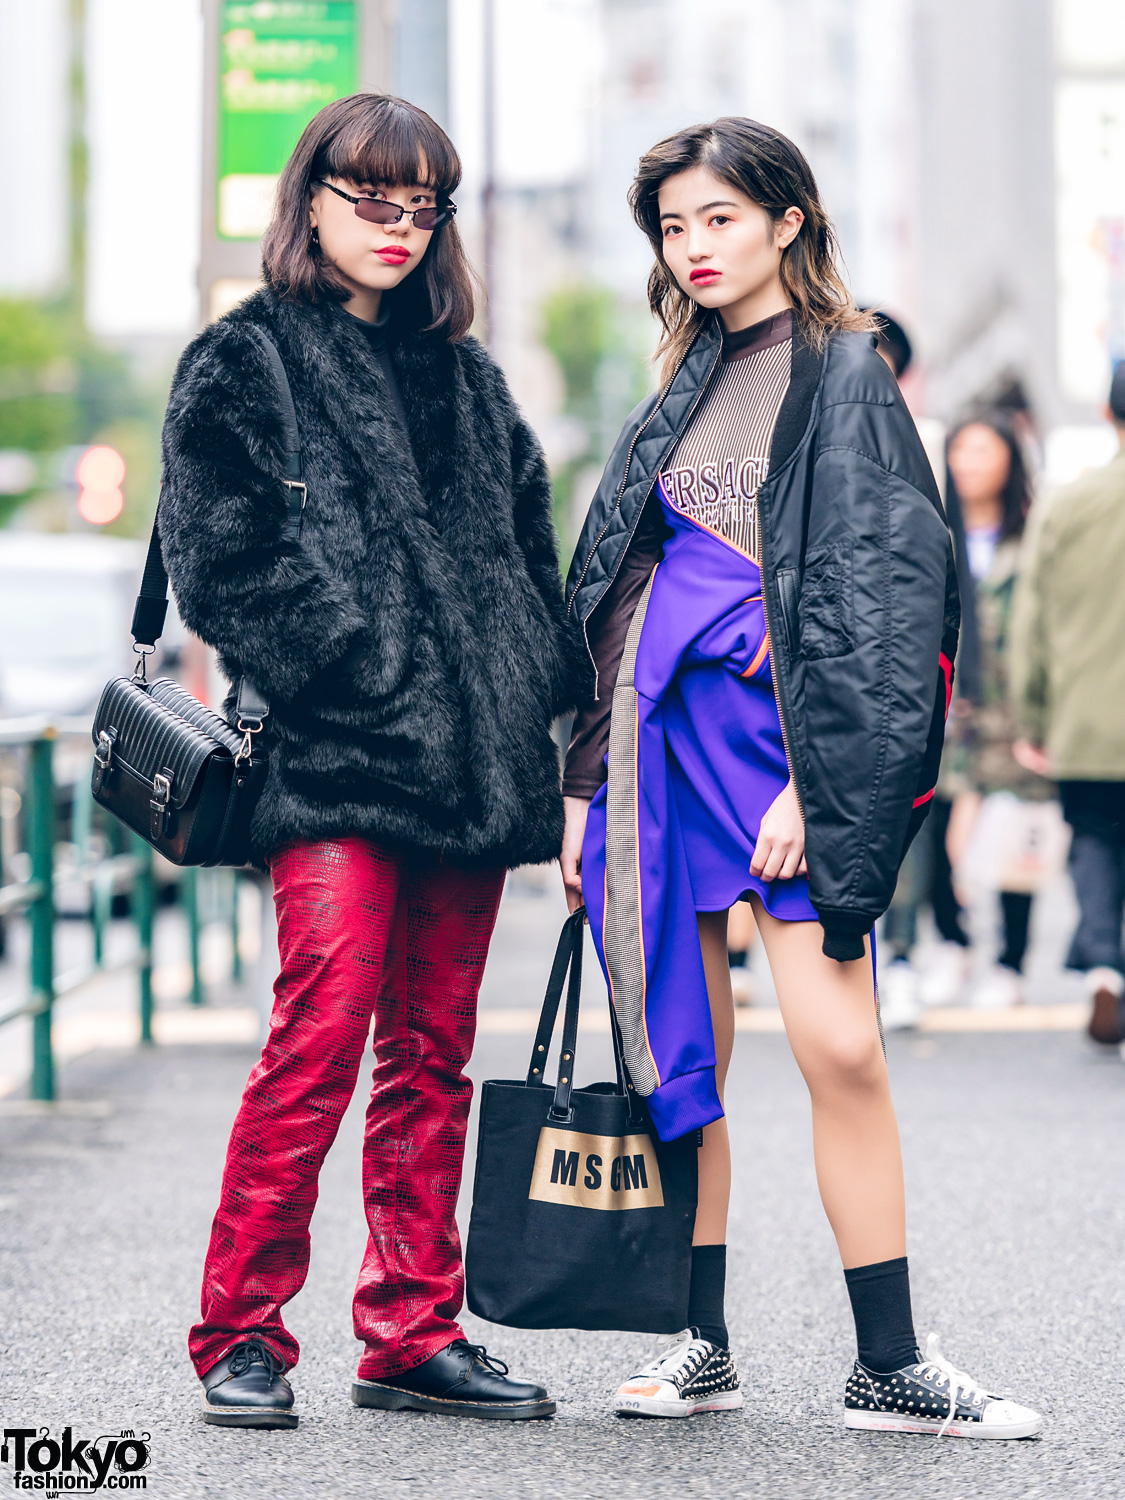 Japanese Streetwear in Harajuku w/ Pinnap, Guess, Dr. Martens, The Four-Eyed, MSGM, #FRZ, Versace, Avalanche & Pameo Pose